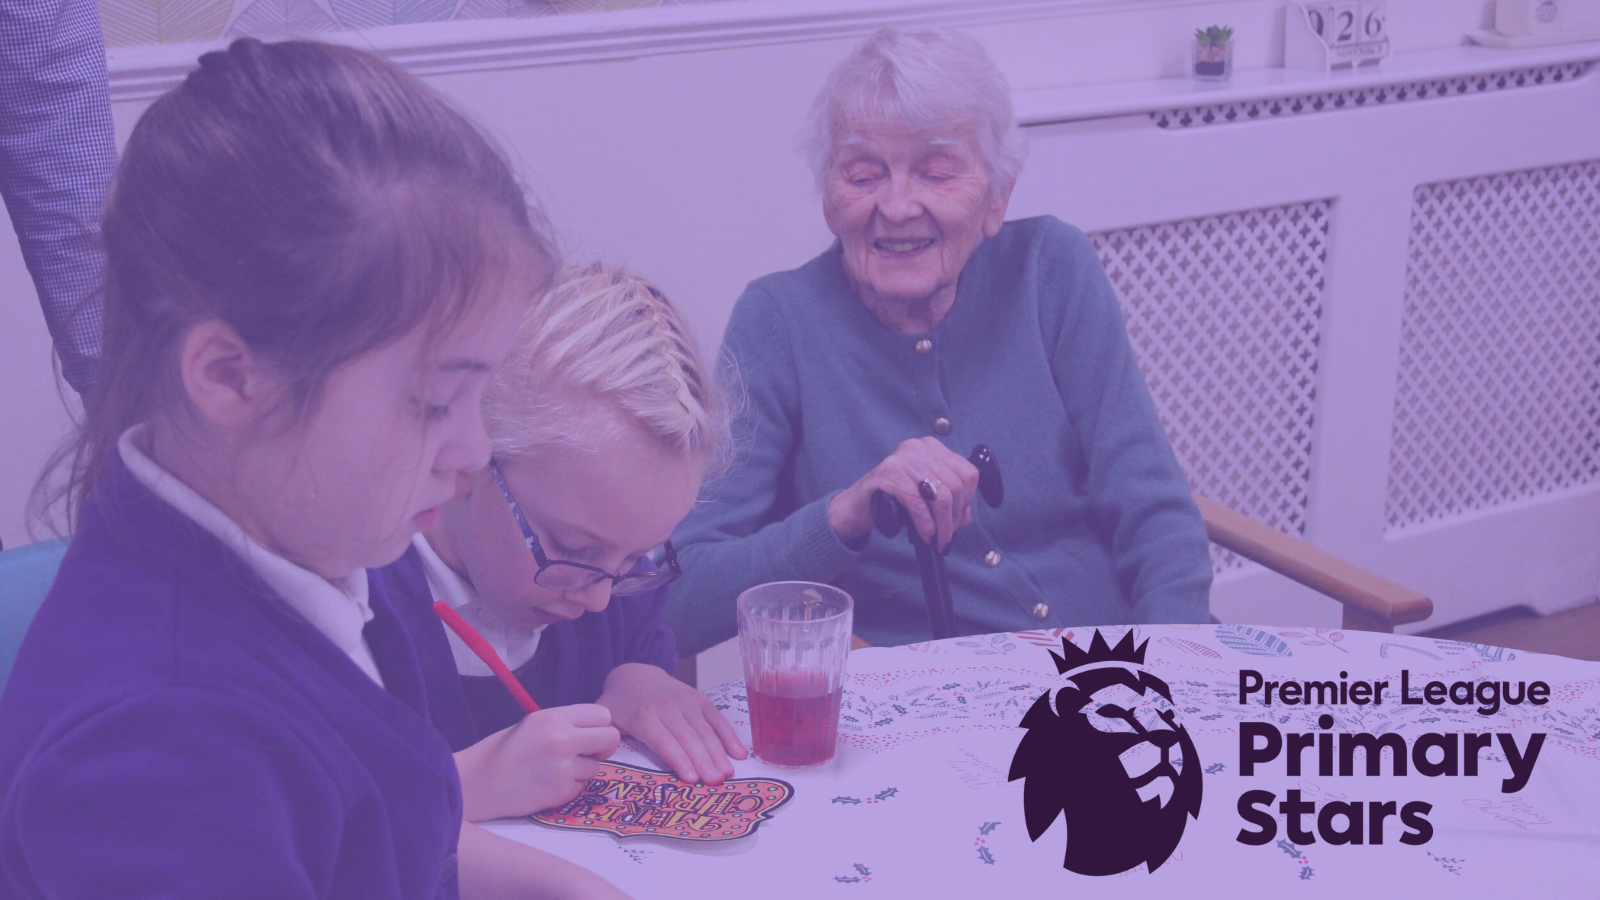 Premier League Primary Stars Social Action Project sees Primary School visit local care home!